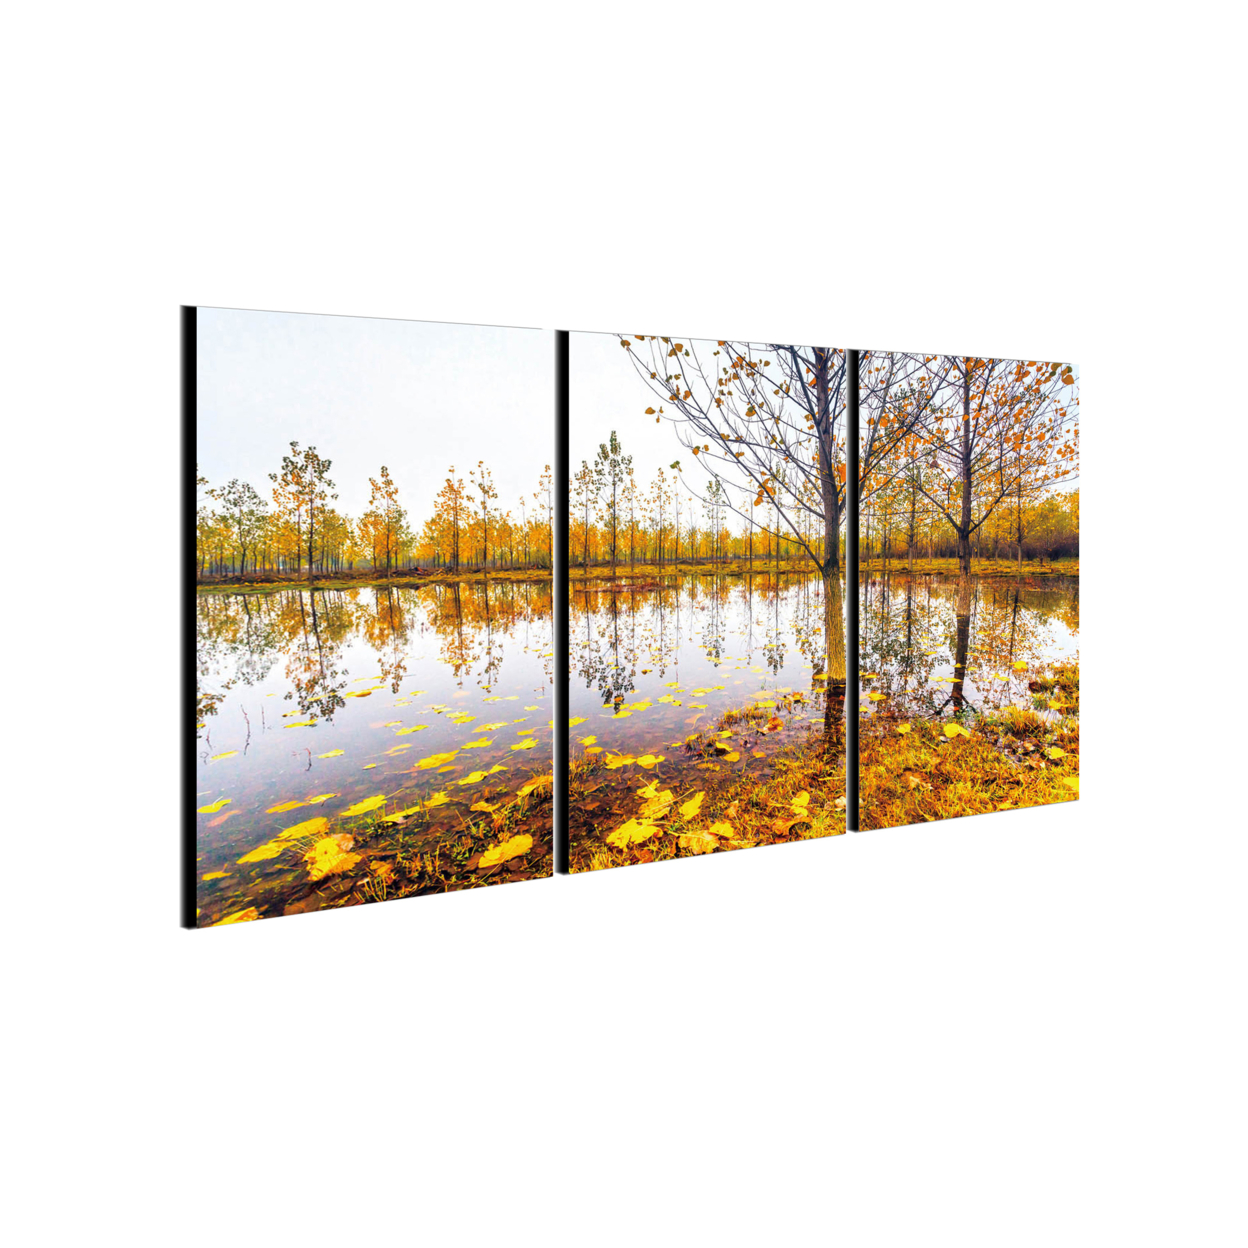 Falling Leaves 3 Piece Wrapped Canvas Wall Art Print 20x40.5 Inches